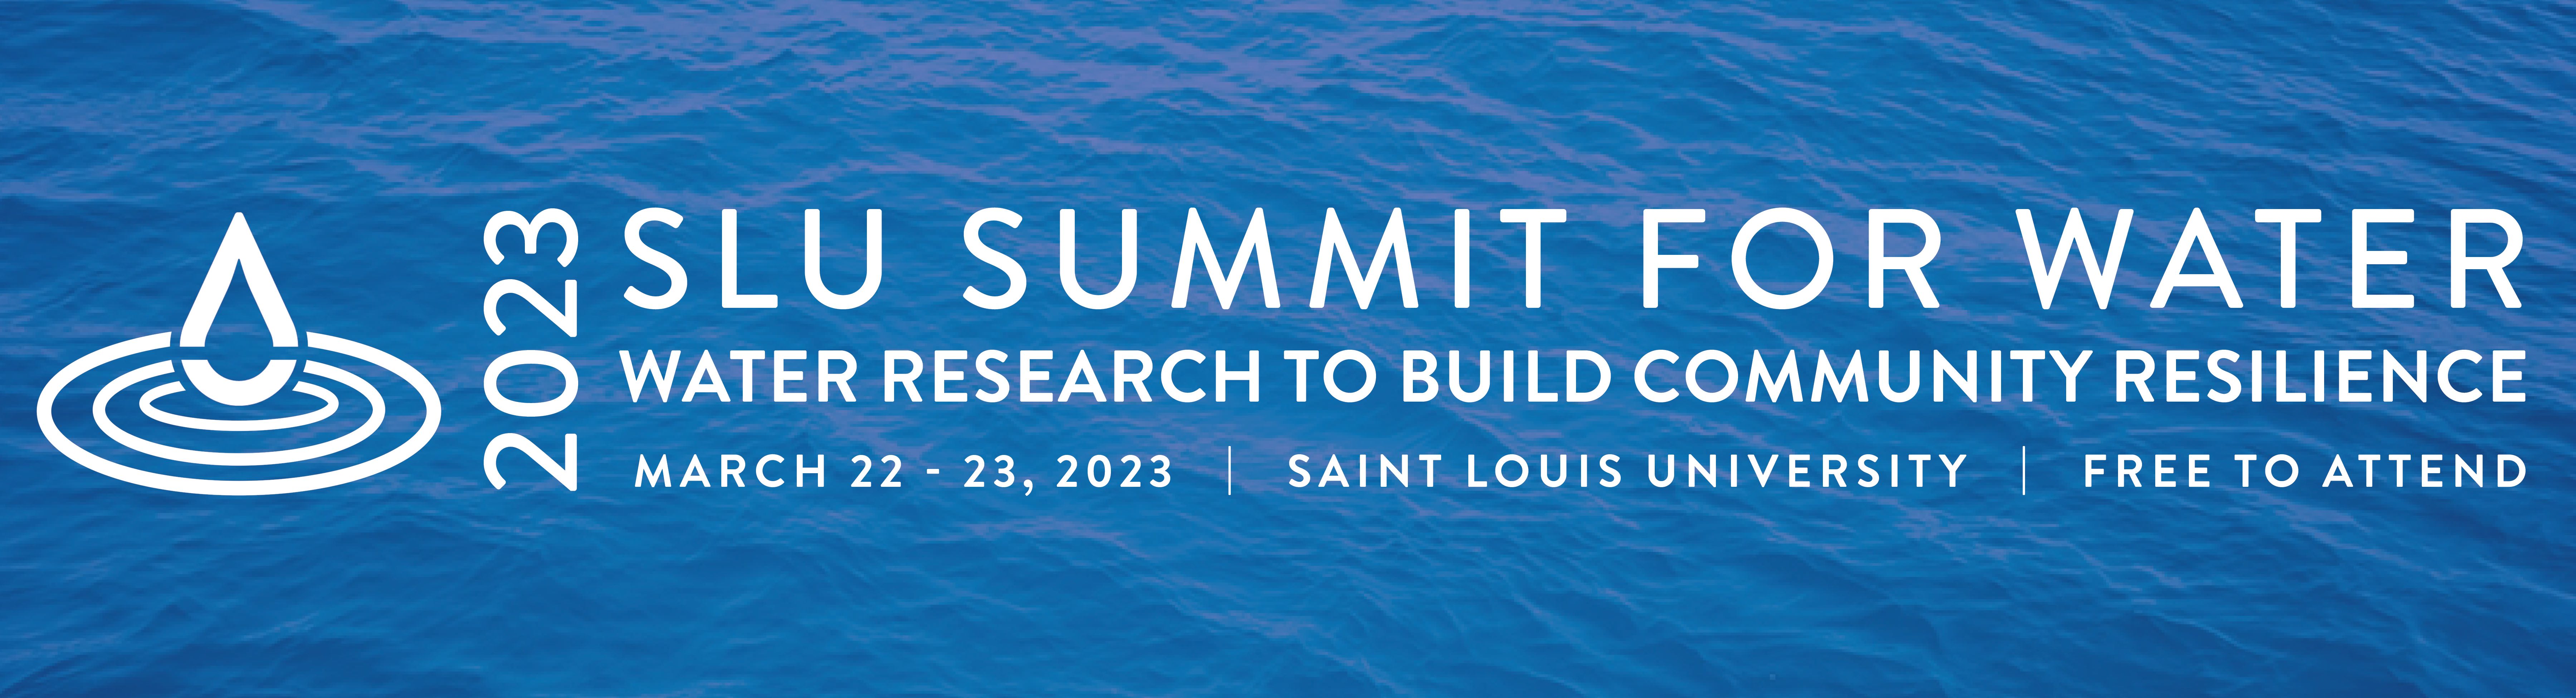 2023 SLU Summit for Water, Water Research to Build Community Resilience, March 22-23, 2023, Hosted In-Person on SLU's Campus and Online by SLU's Water Institute, Free to Attend